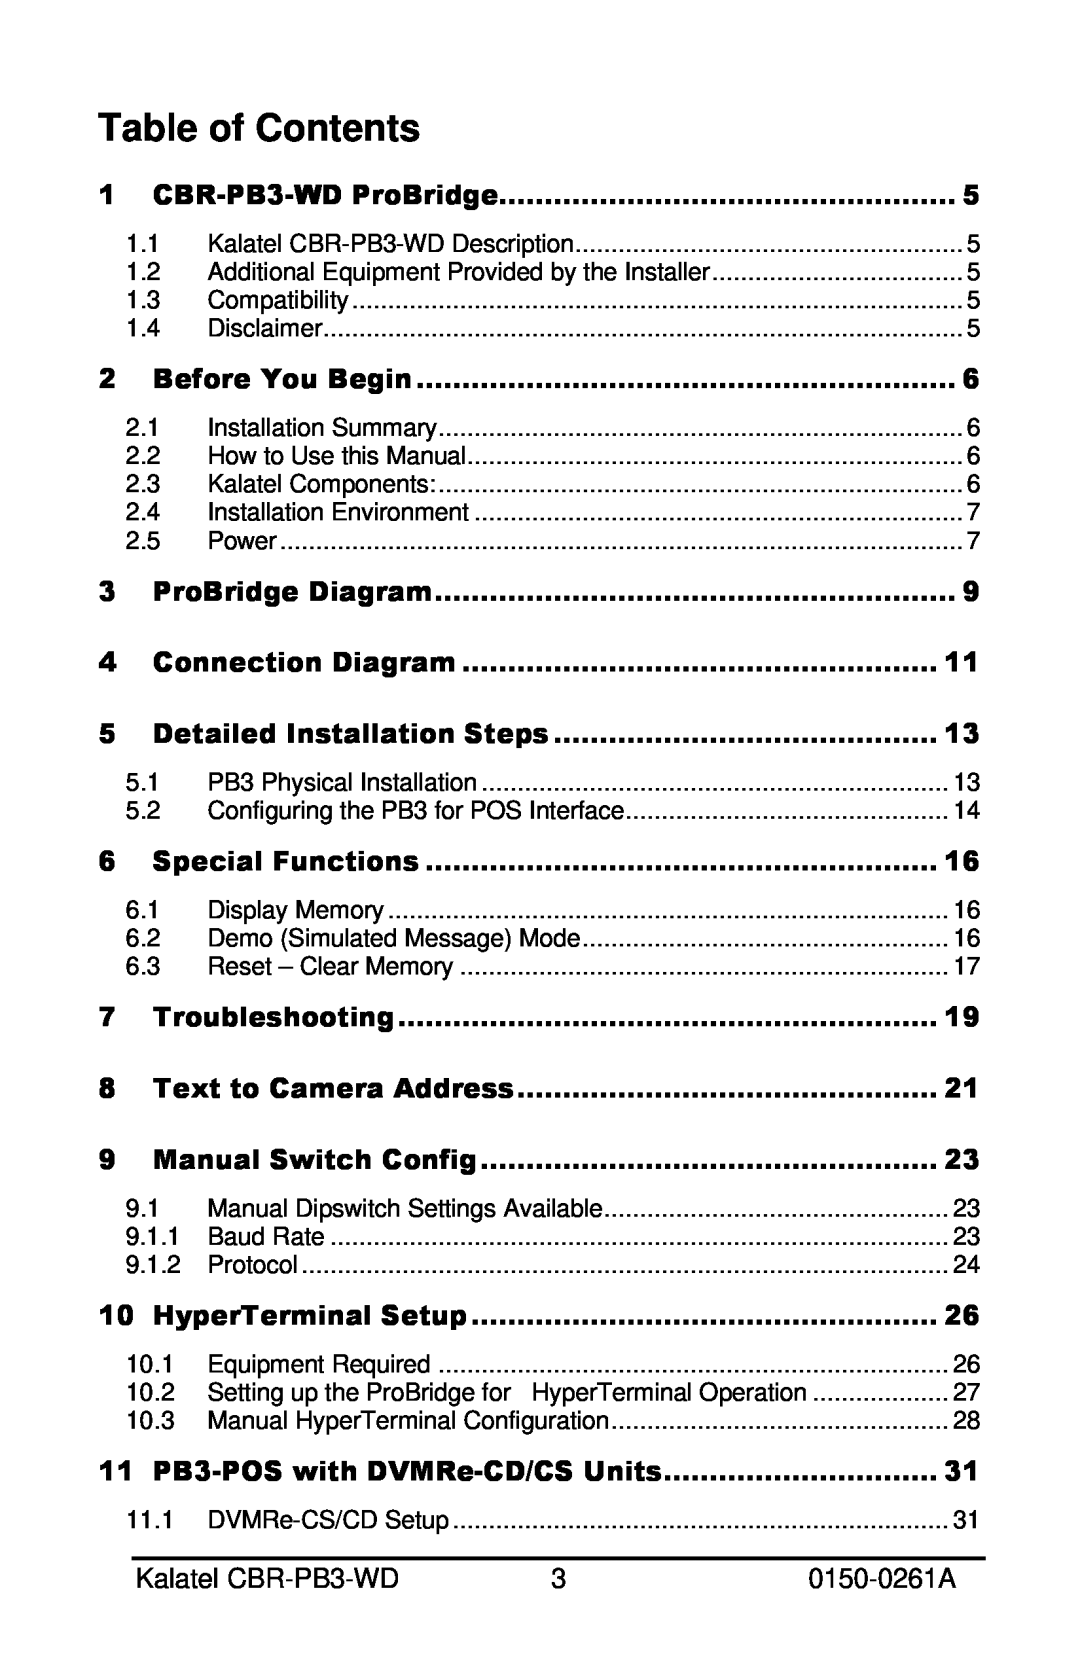 GE CBR-PB3-WD installation manual Table of Contents 